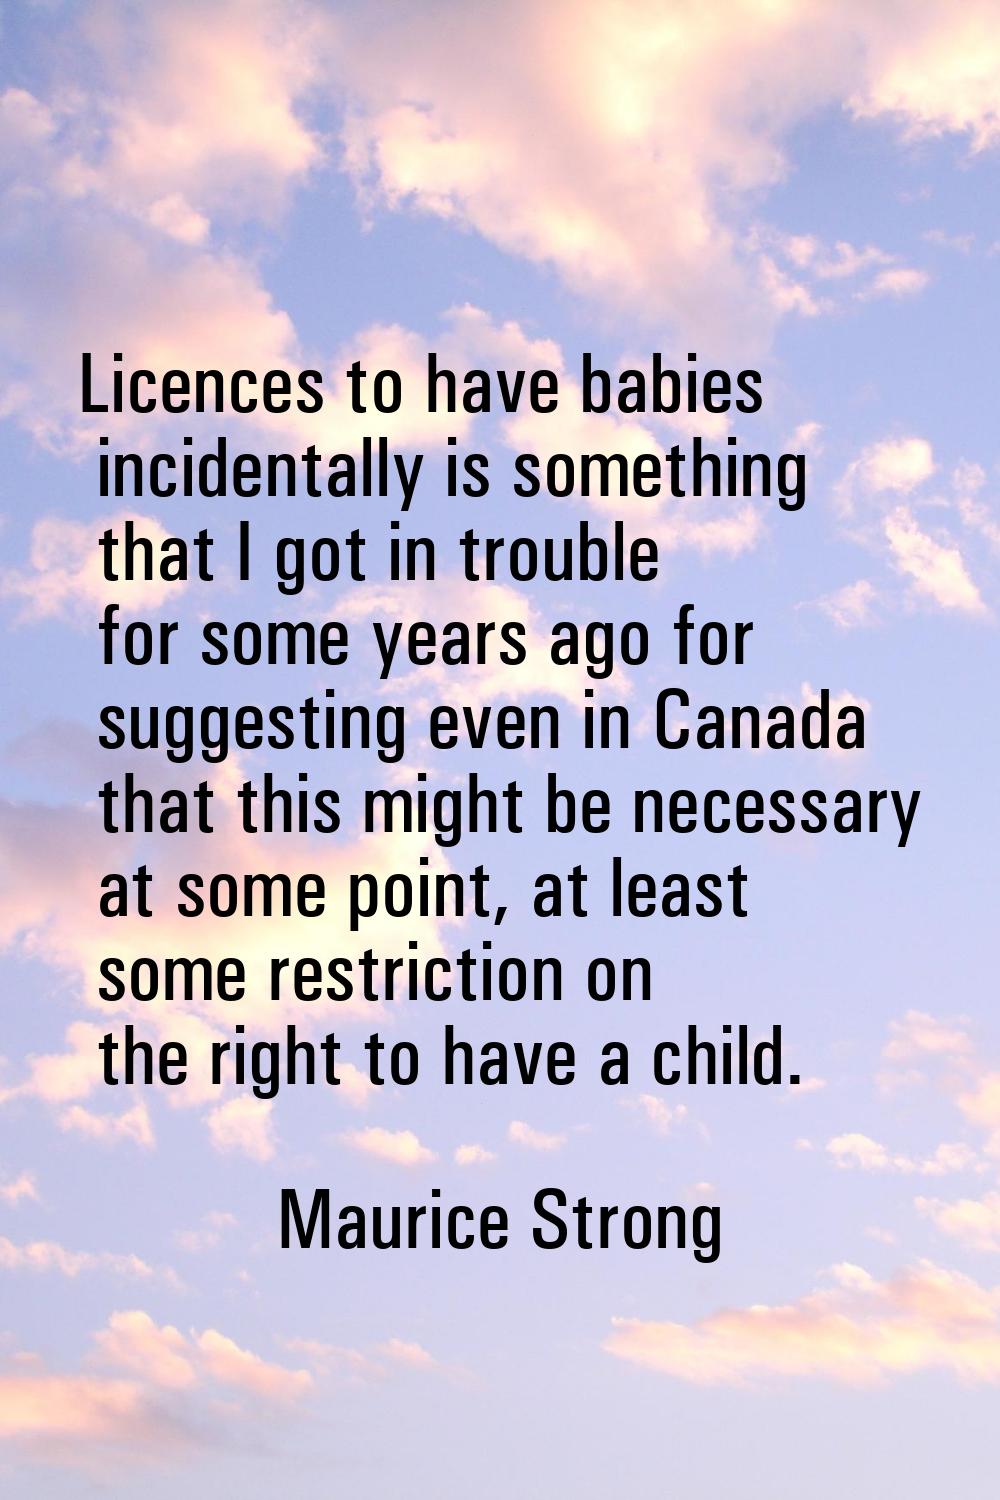 Licences to have babies incidentally is something that I got in trouble for some years ago for sugg